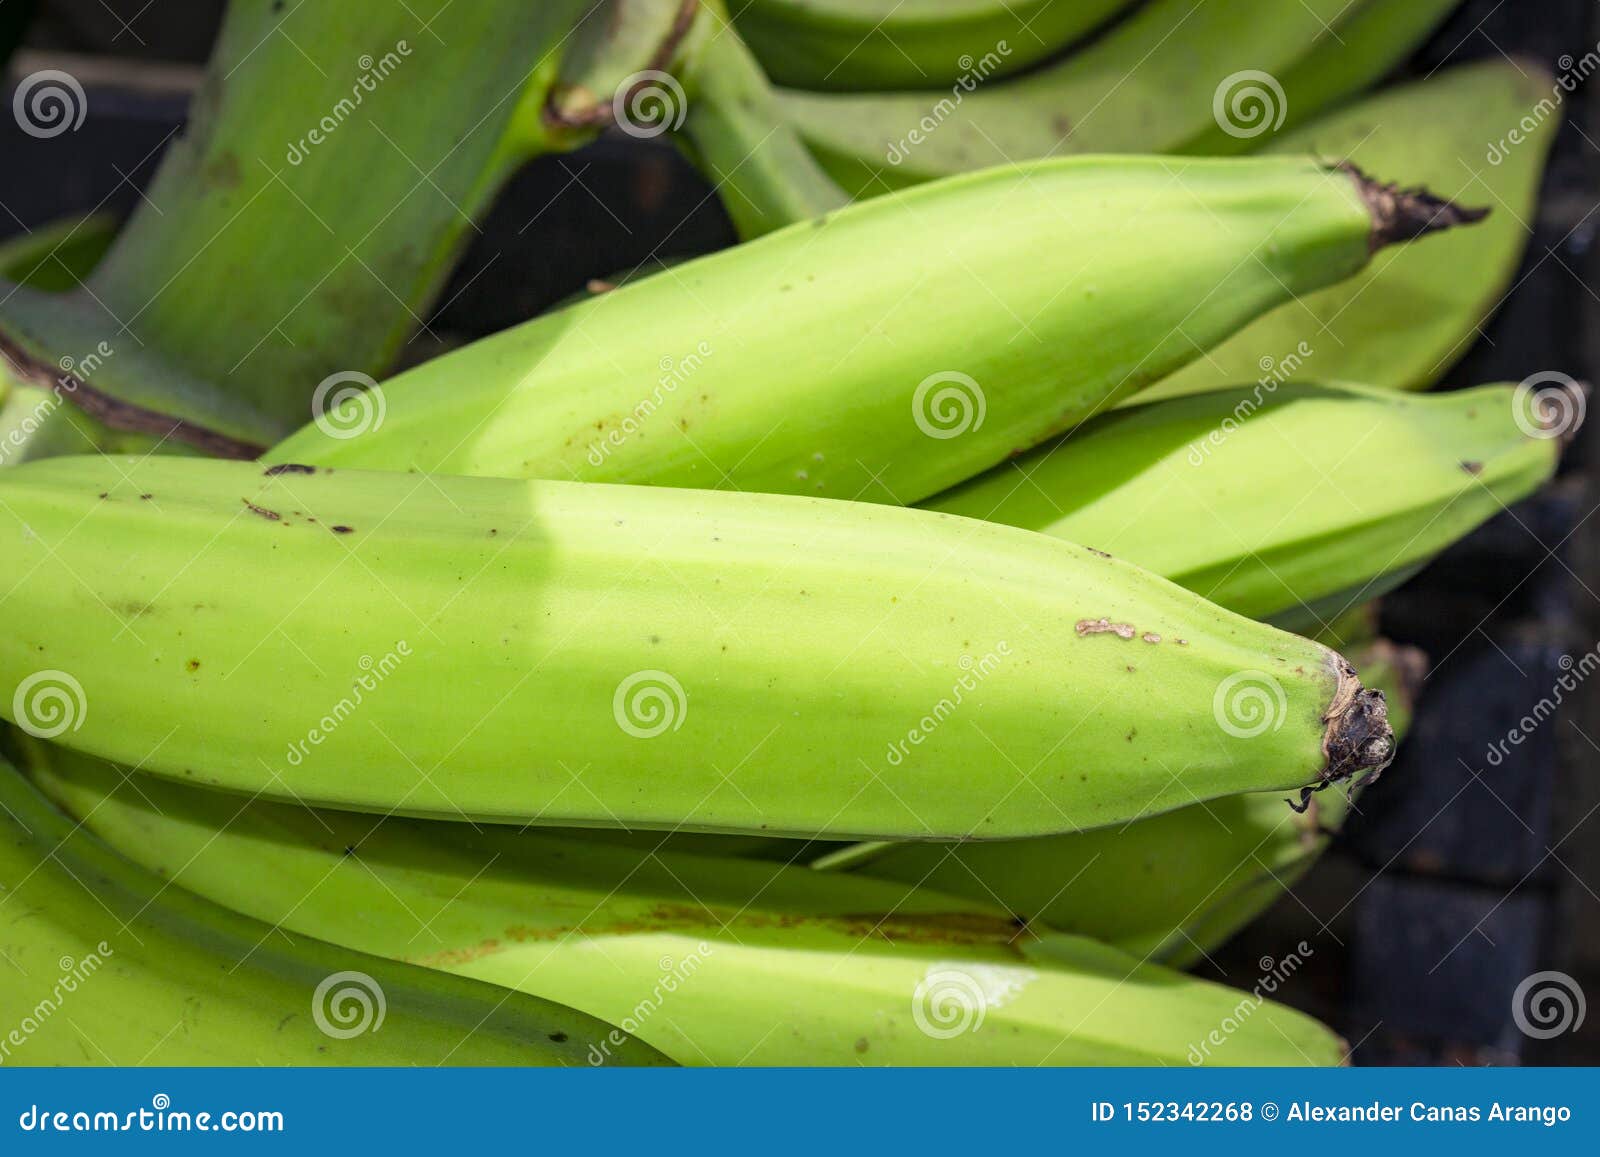 group of green bananas for sale